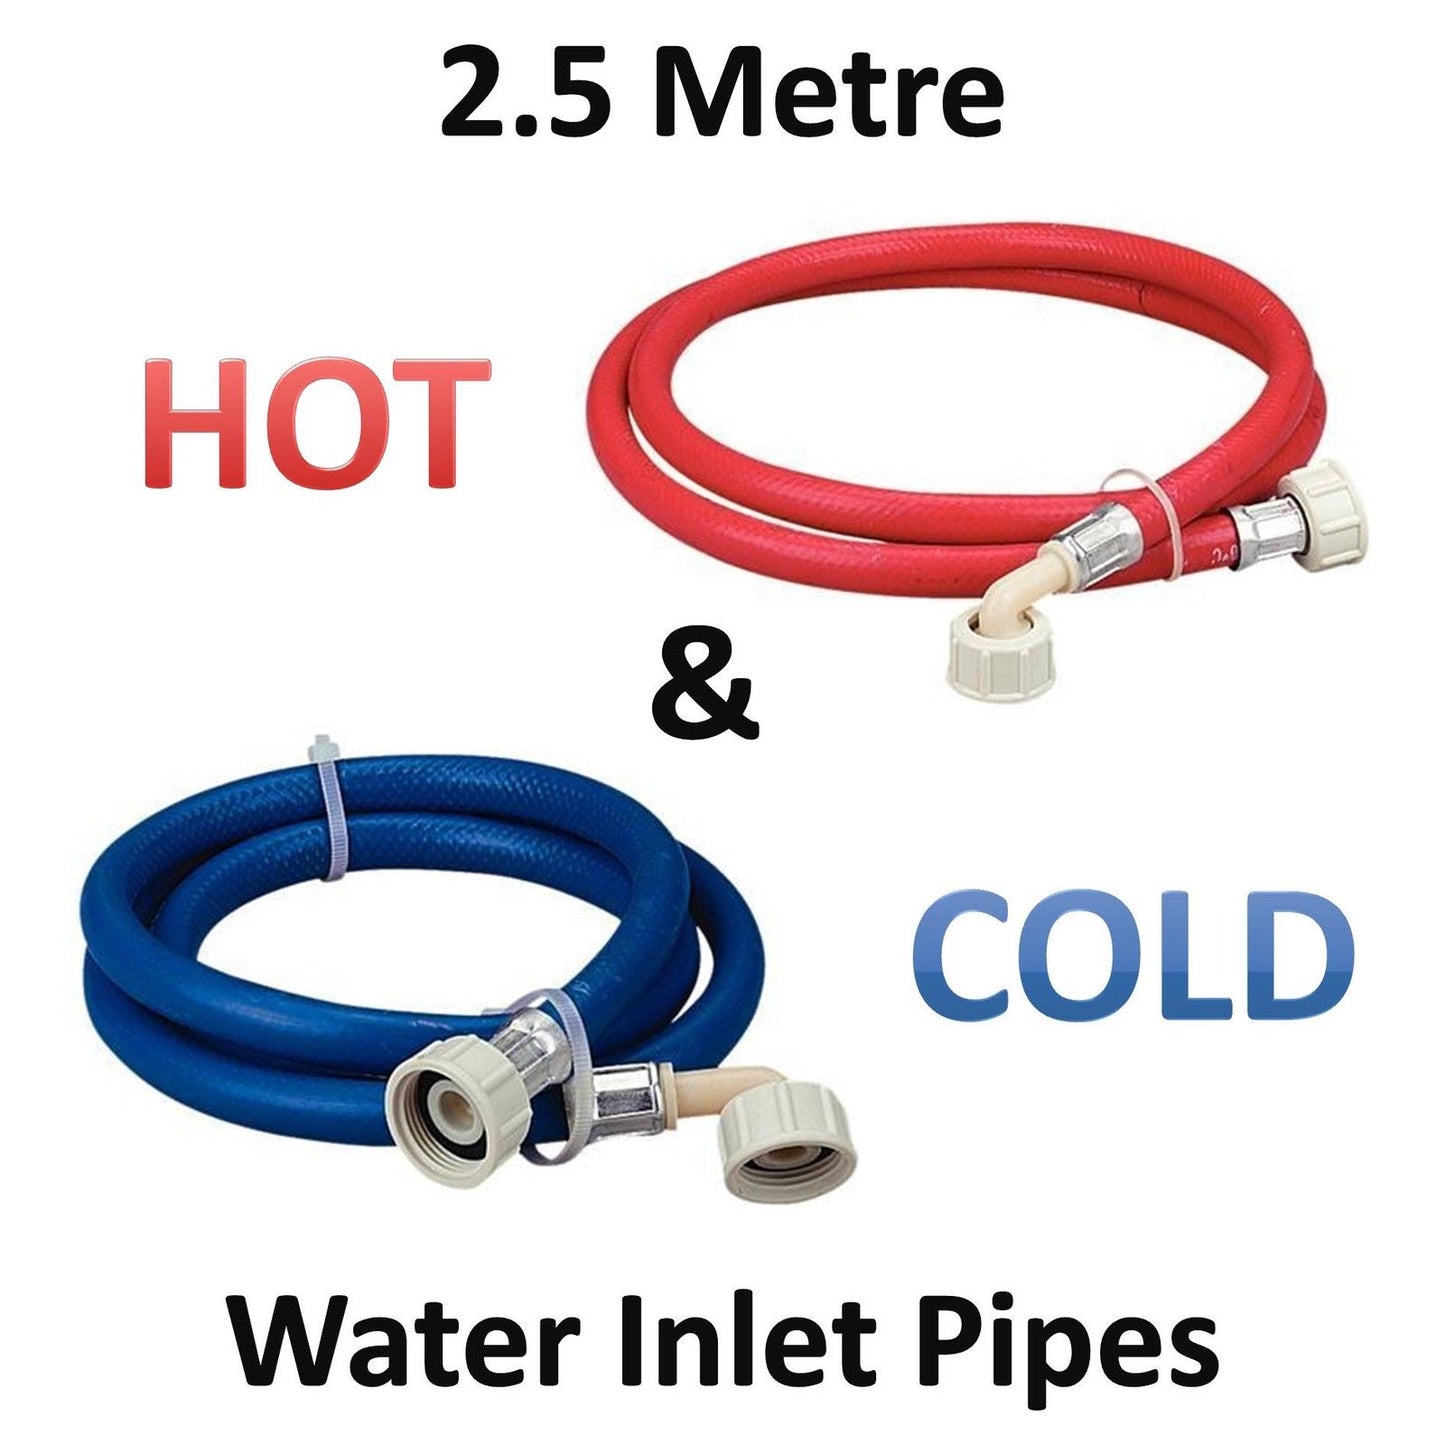 2.5m Long Washing Machine Hose Pipes Water Fill Hose 1 BLUE & 1 RED Cold + Hot